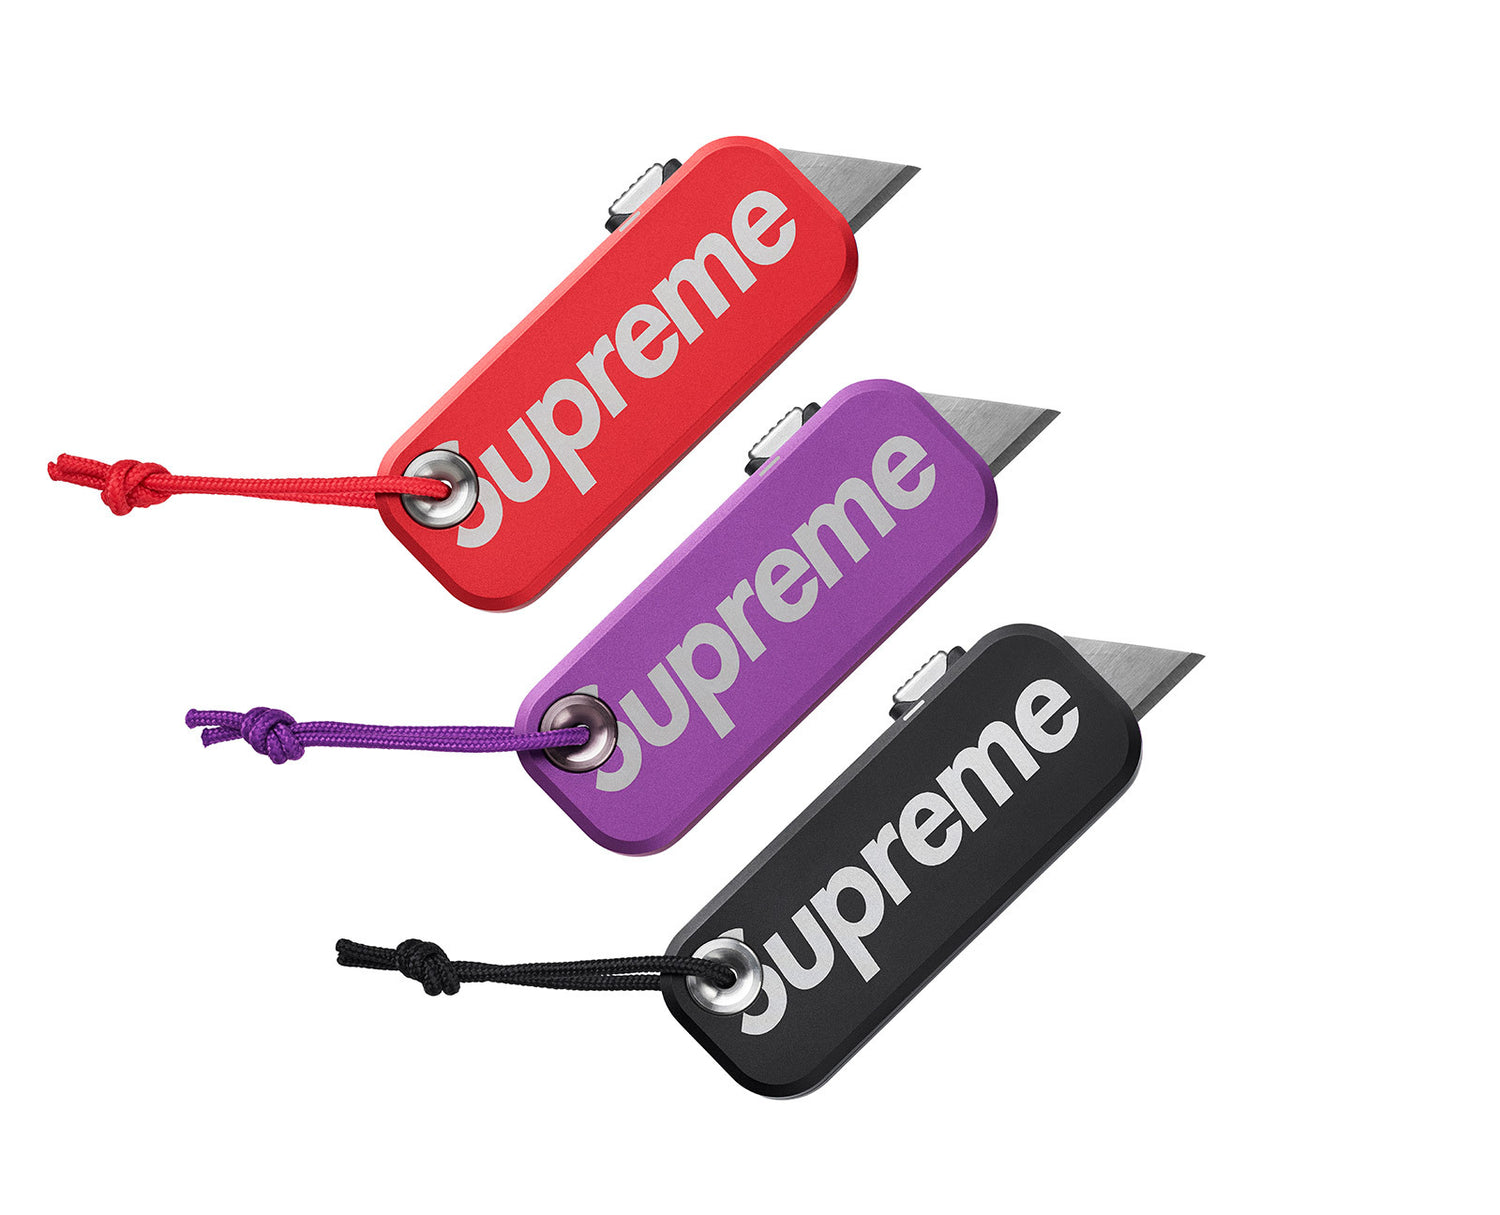 The Palmer Supreme knife with red, purple and black cases.